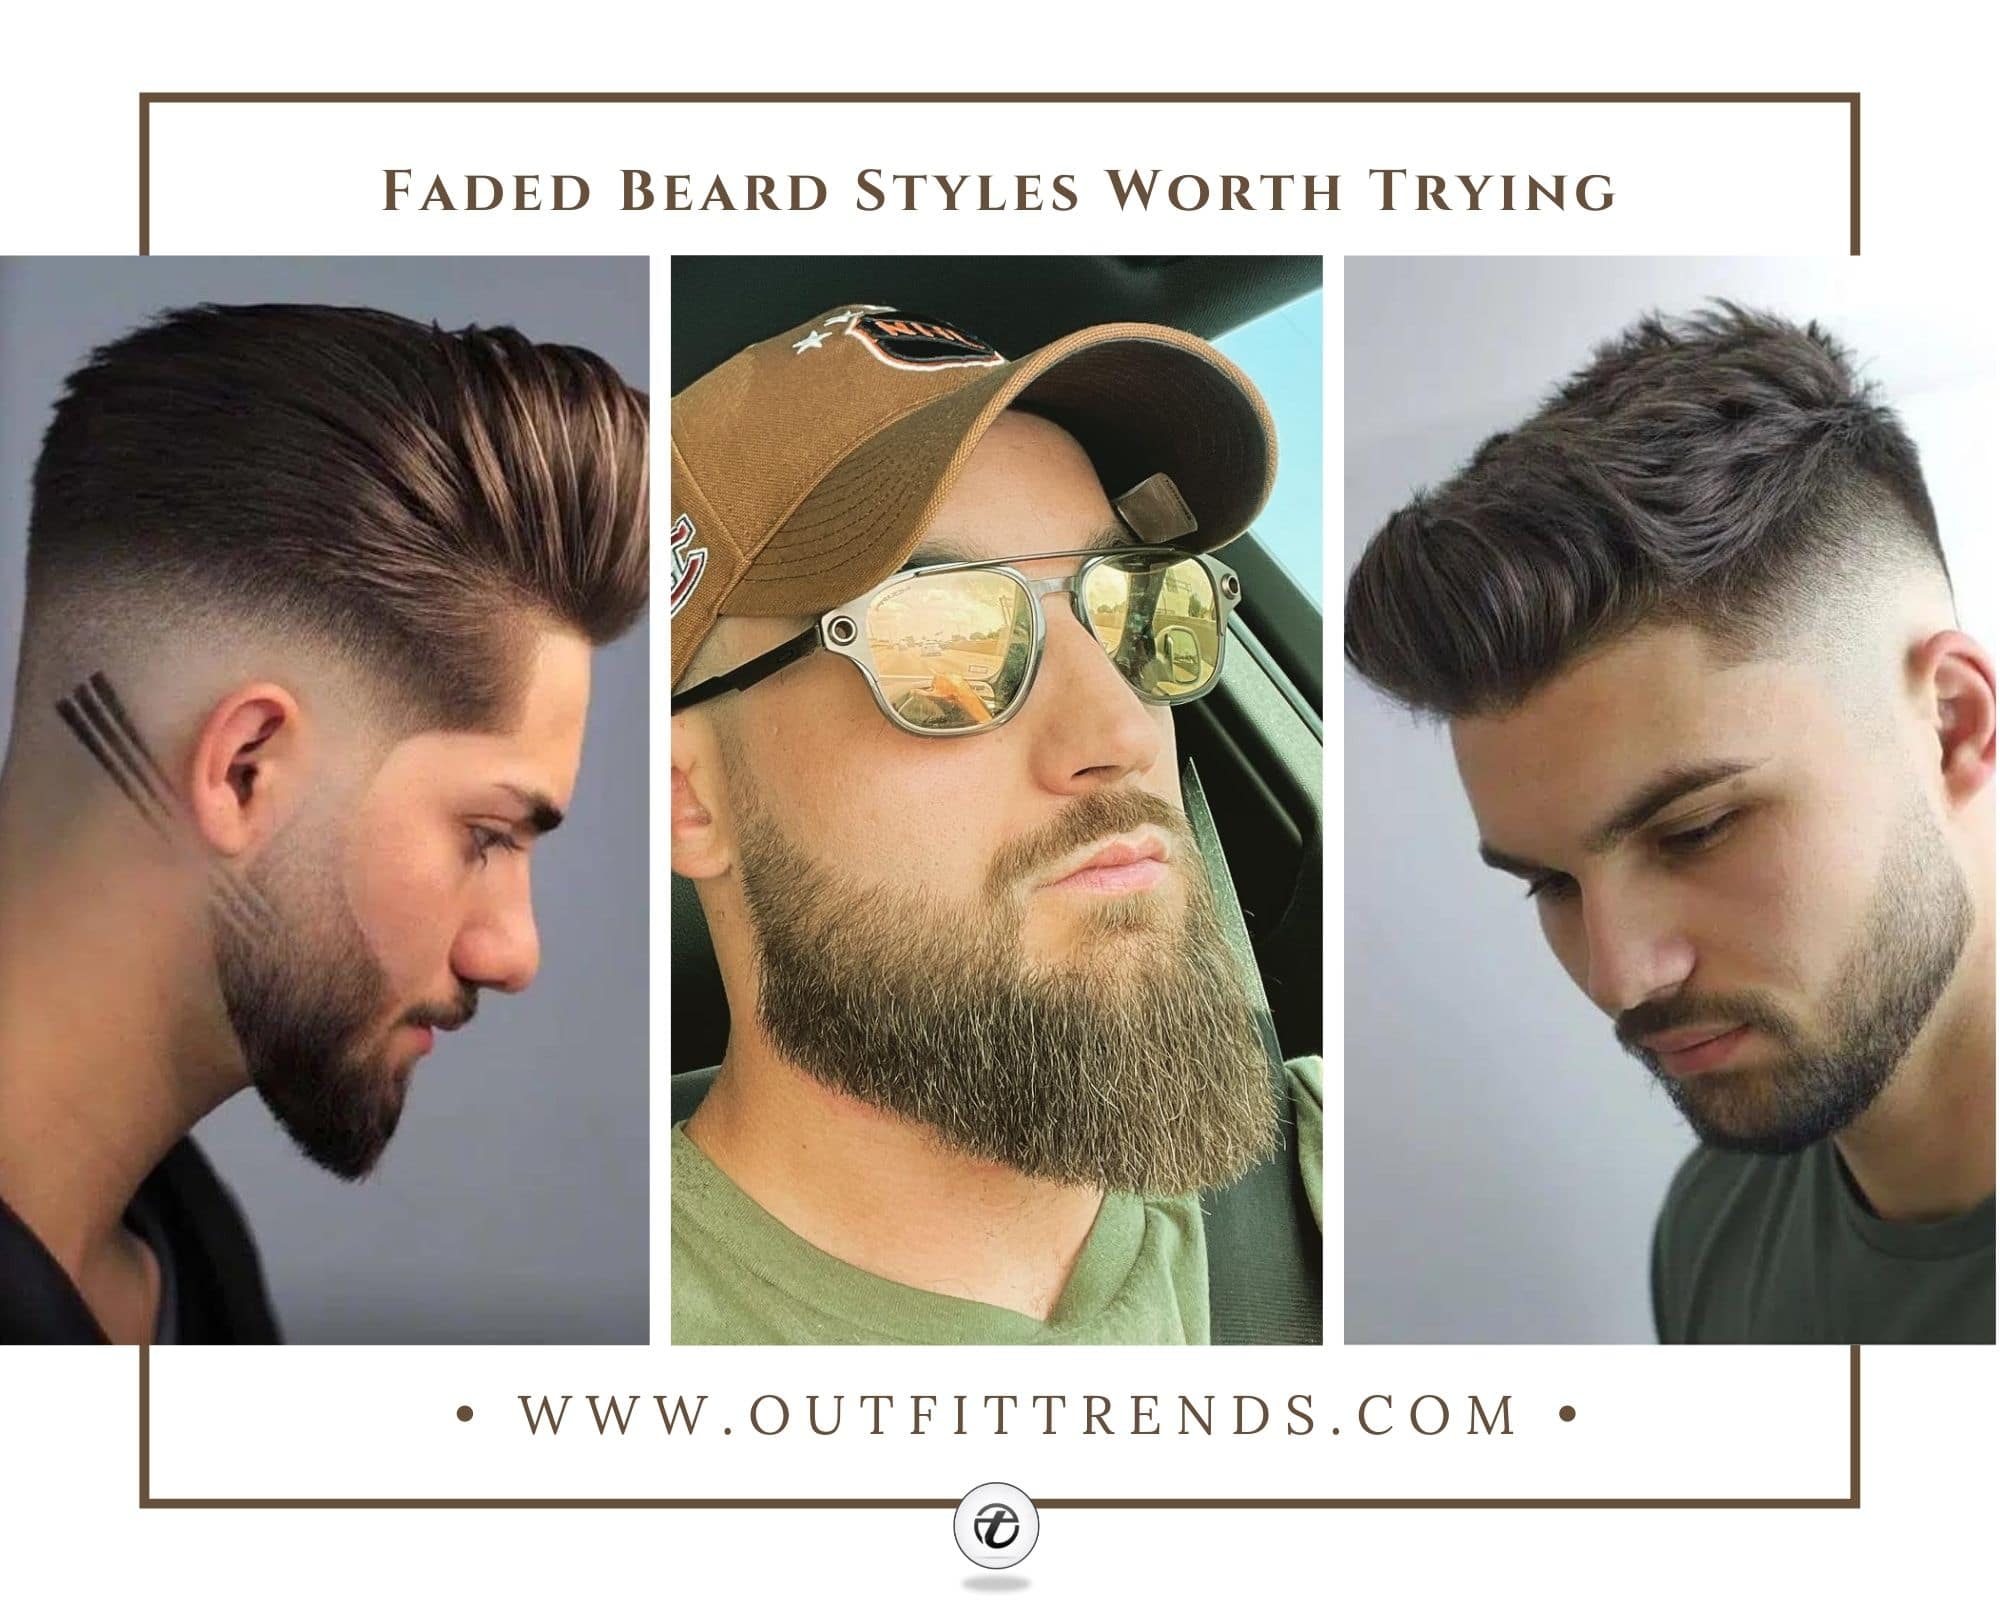 50 Best Beard Styles For Men With Pictures 2022 Dadhi Styles  Offers